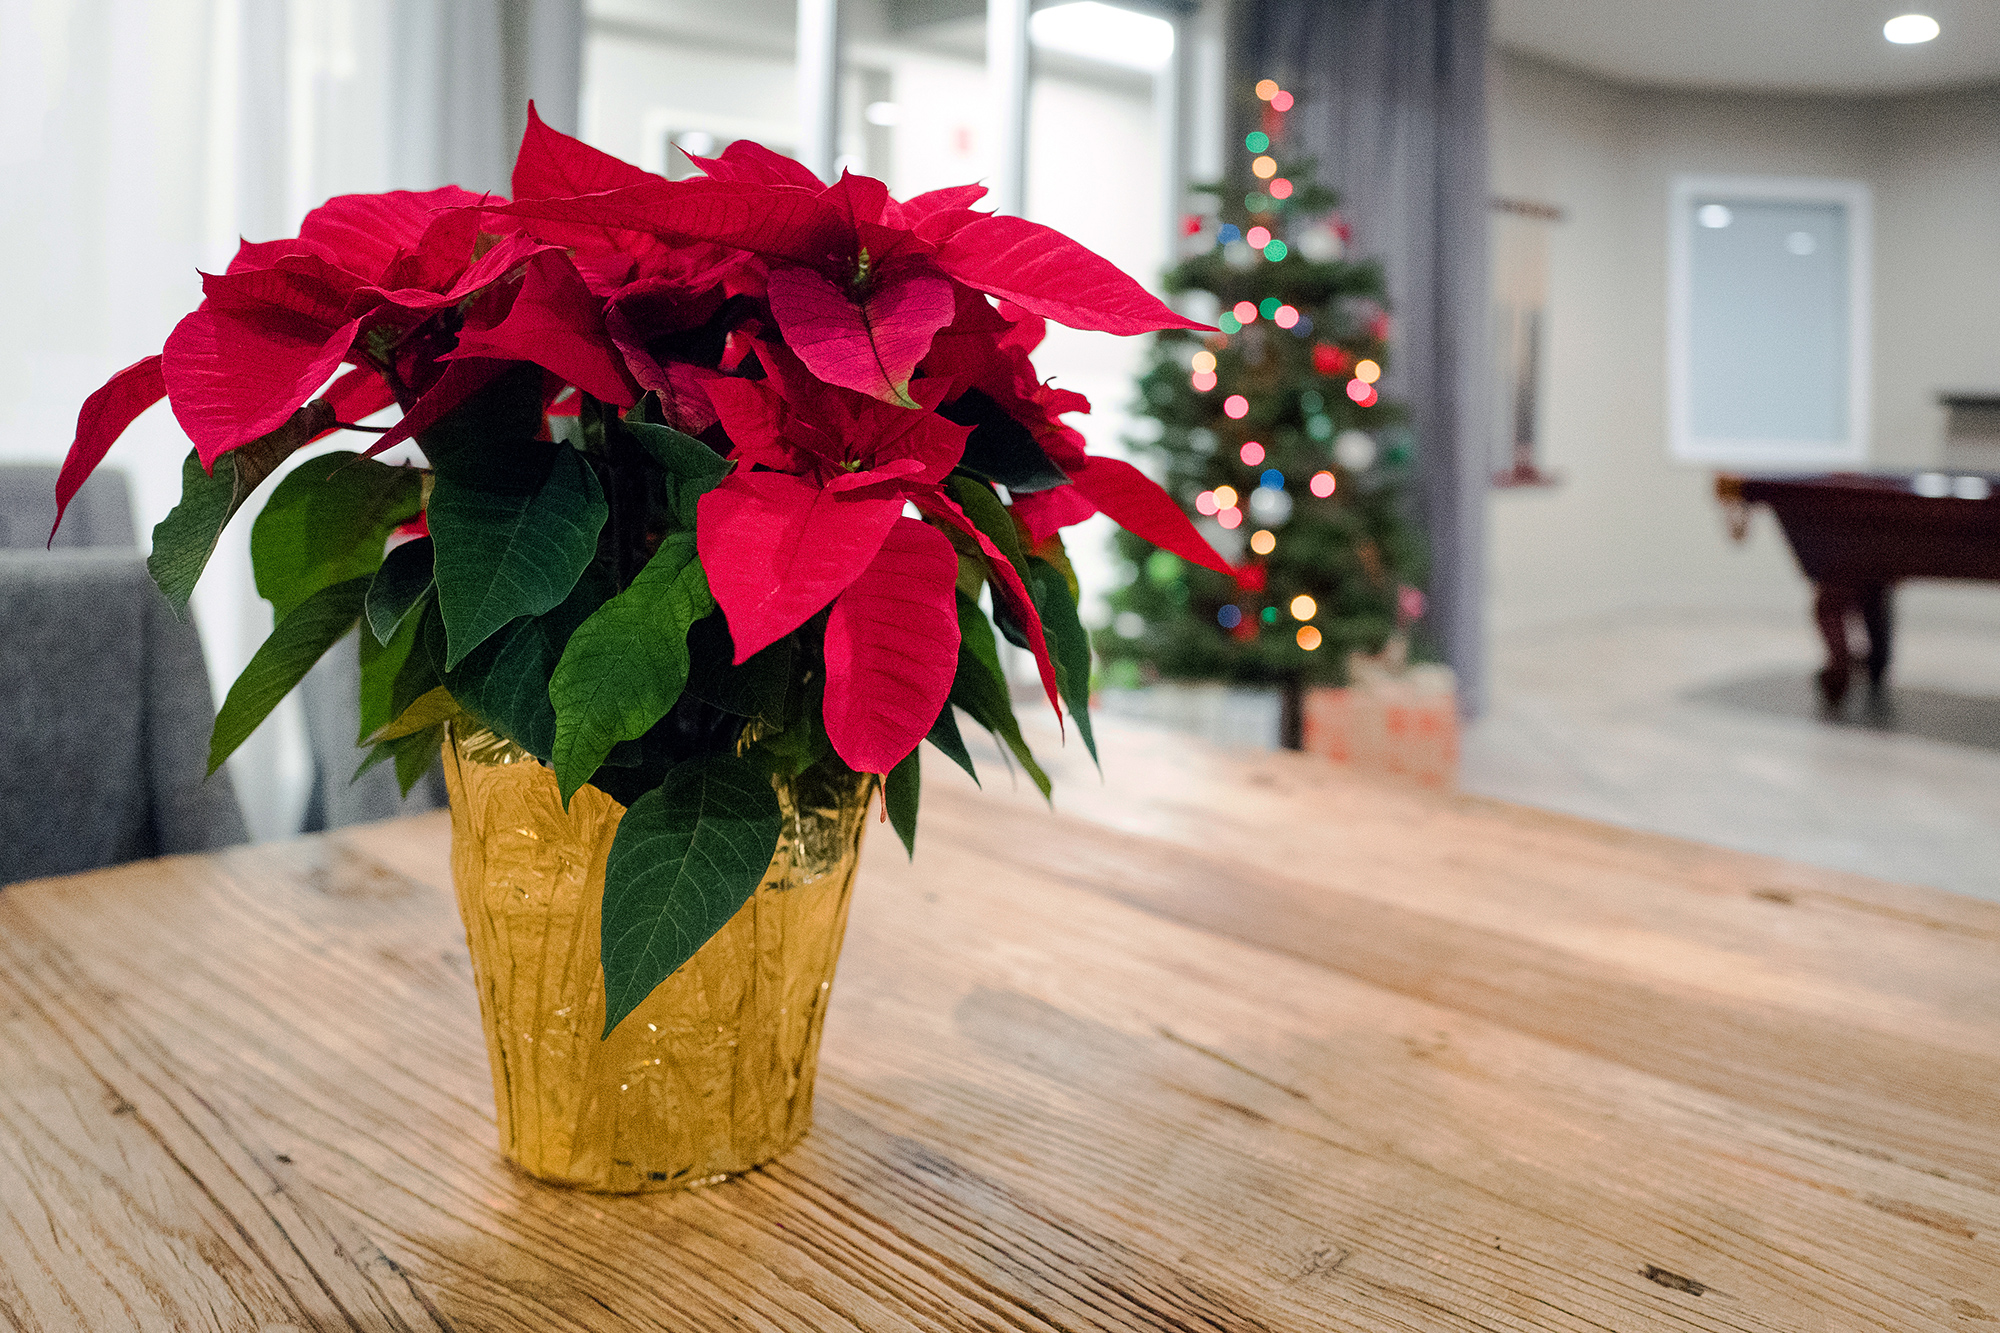 How to elevate care of poinsettias: A e book to the Christmas classic